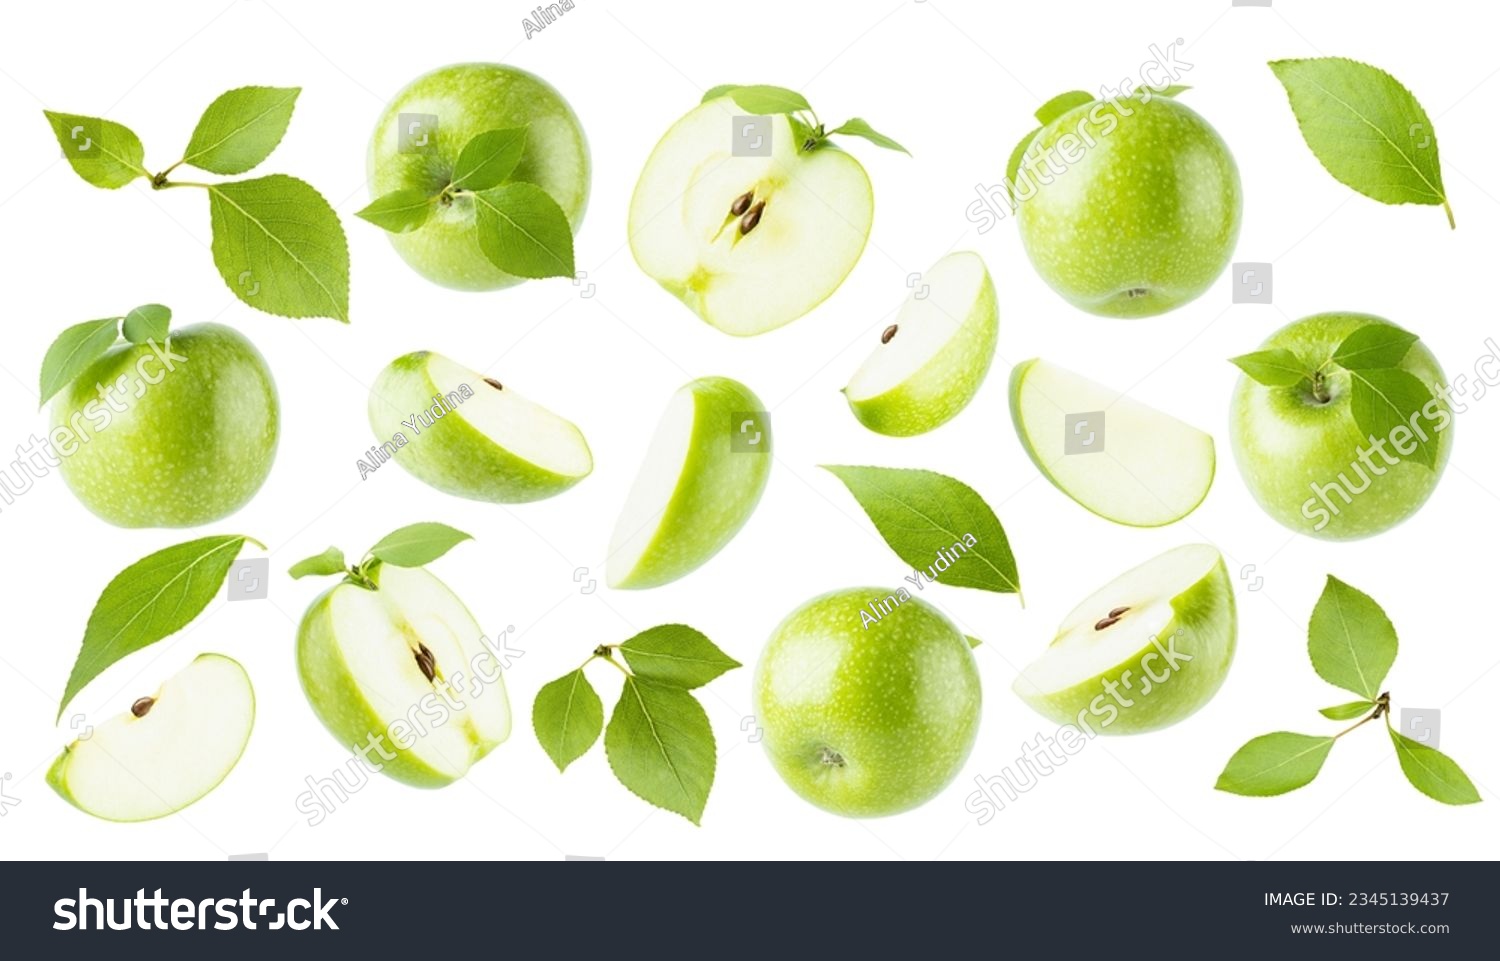 Fresh green apples and green leaves, rich collection - whole, half and quarter, different sides, fly, levitation as patten, isolated on white background. Summer natural food, fruits, design elements. #2345139437